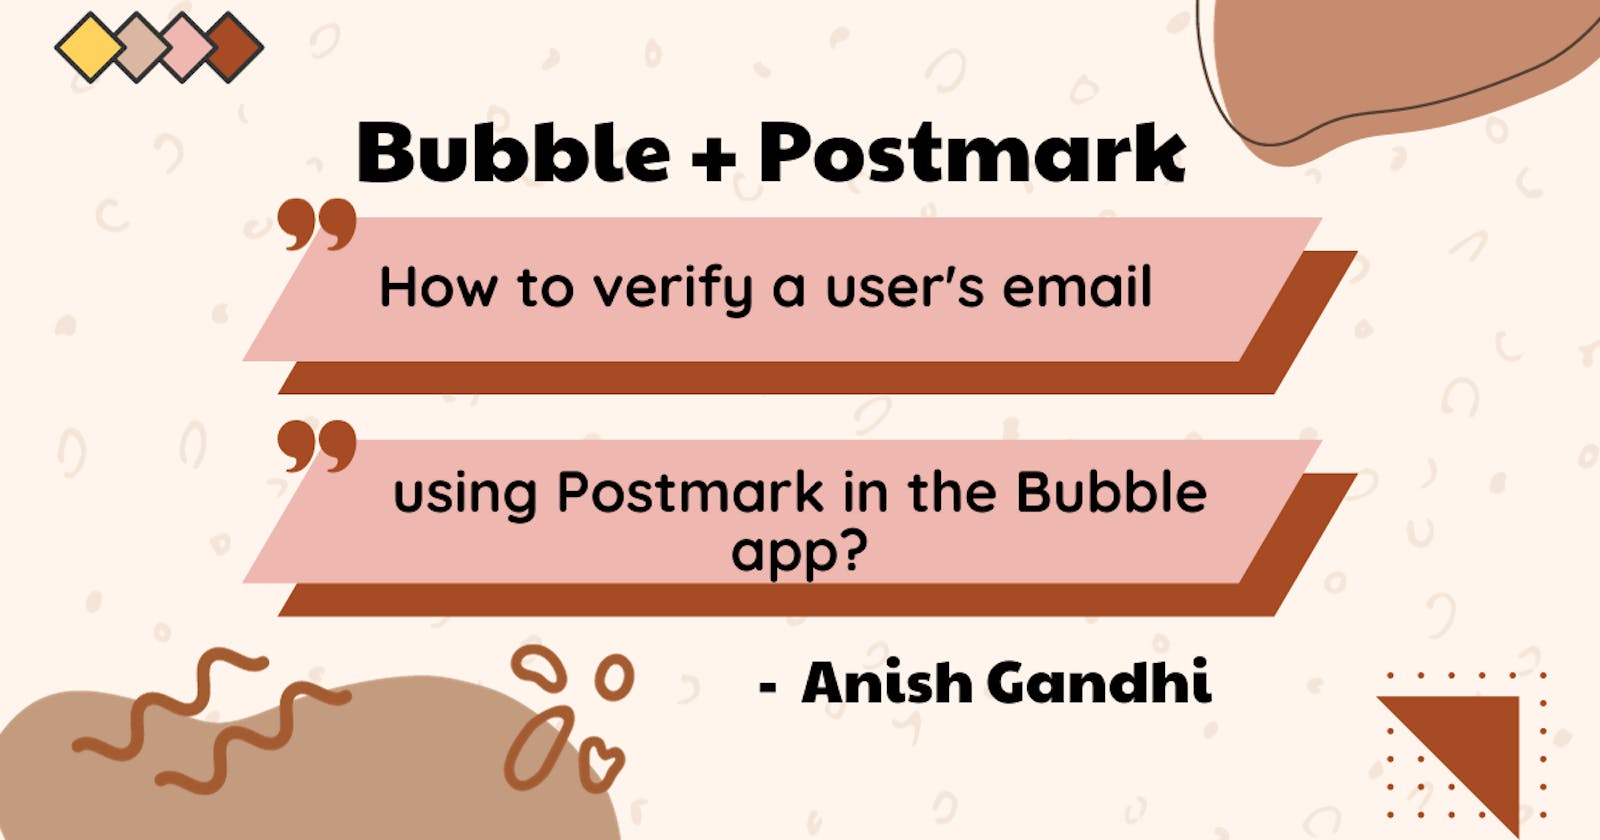 How to Verify a user's email in the Bubble app using Postmark?